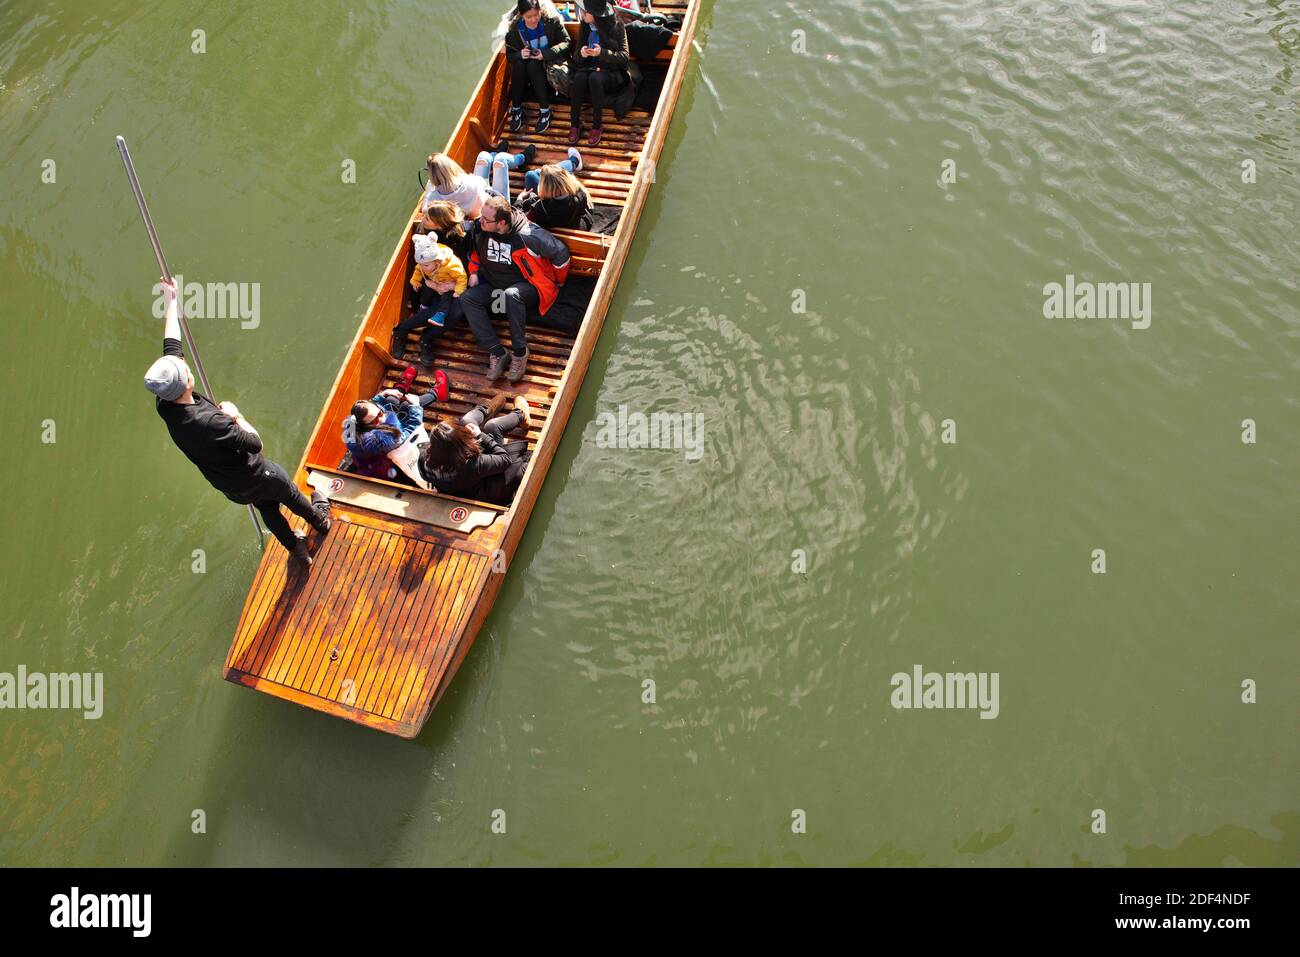 Looking down on a Punt on the River Cam, Cambridge, with tourists and punt guide Stock Photo